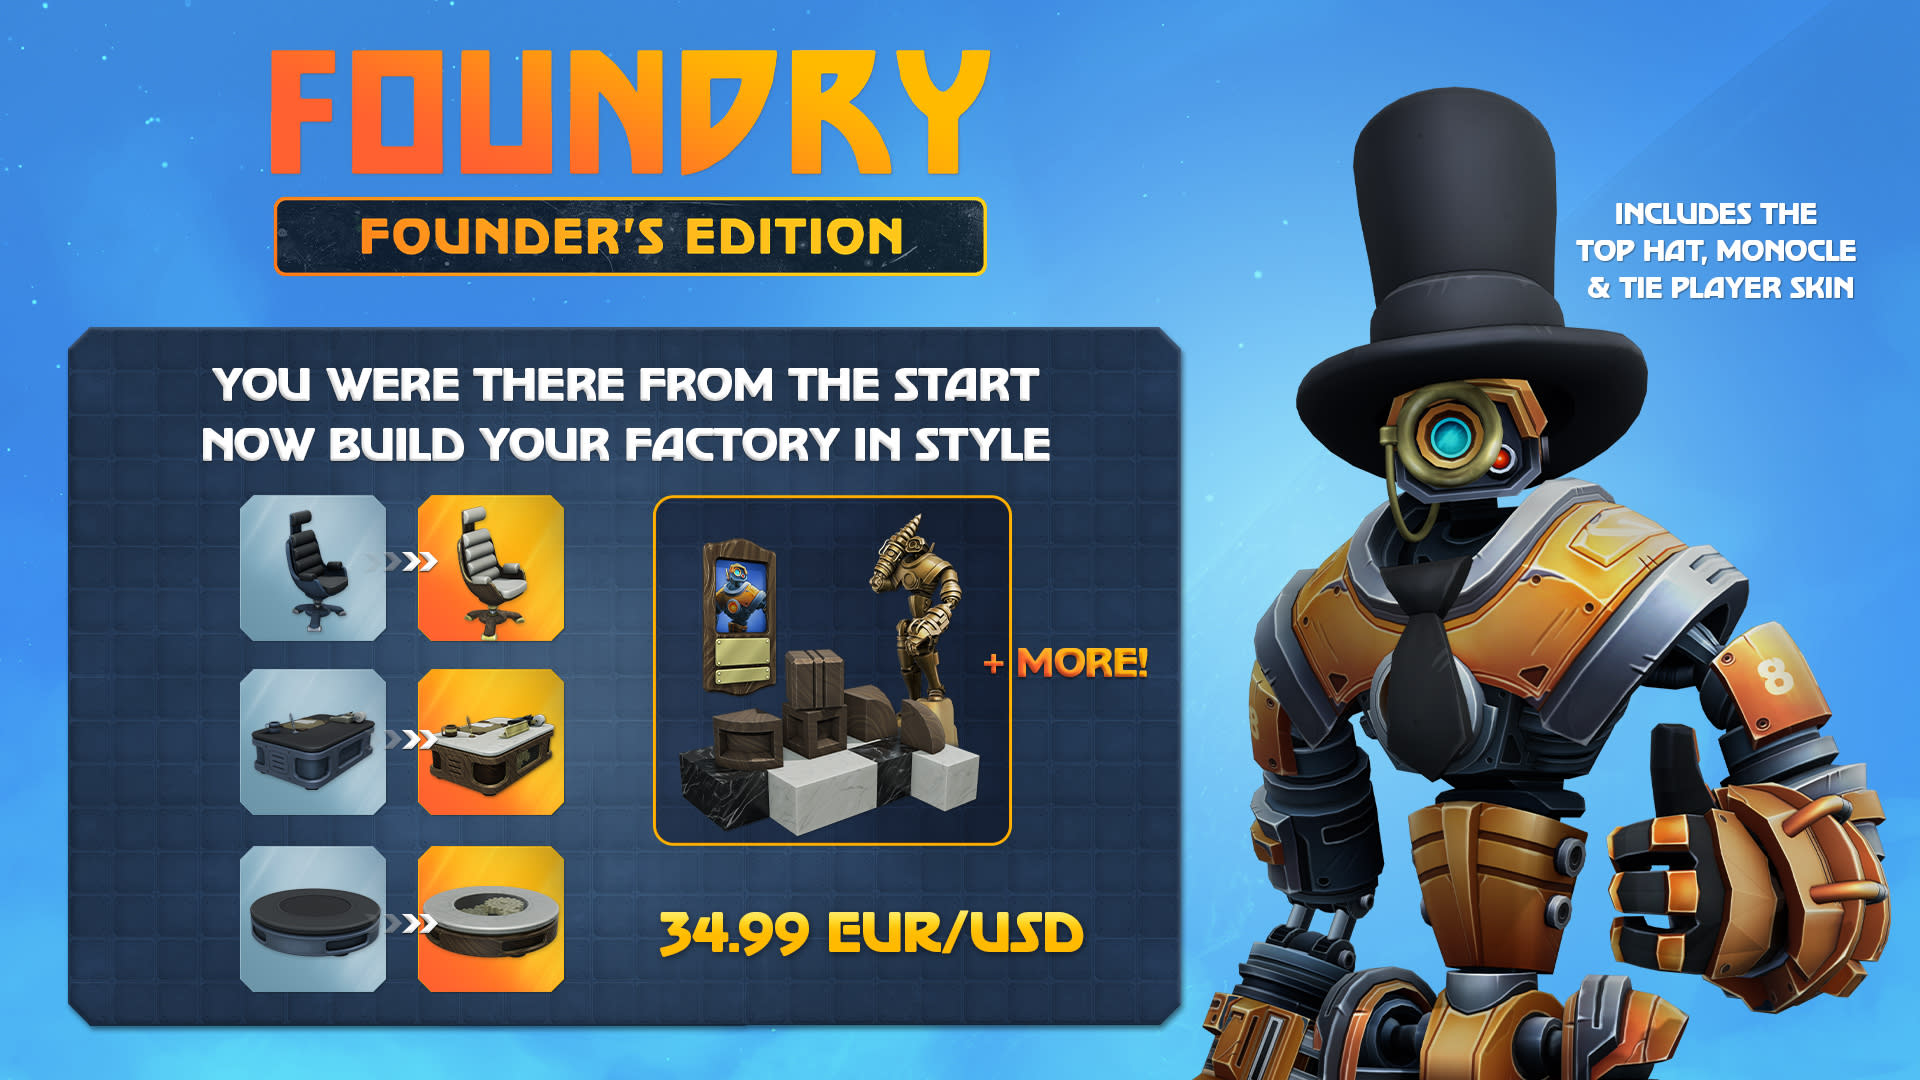 Foundry-FE-Infographic-16-9 (1)